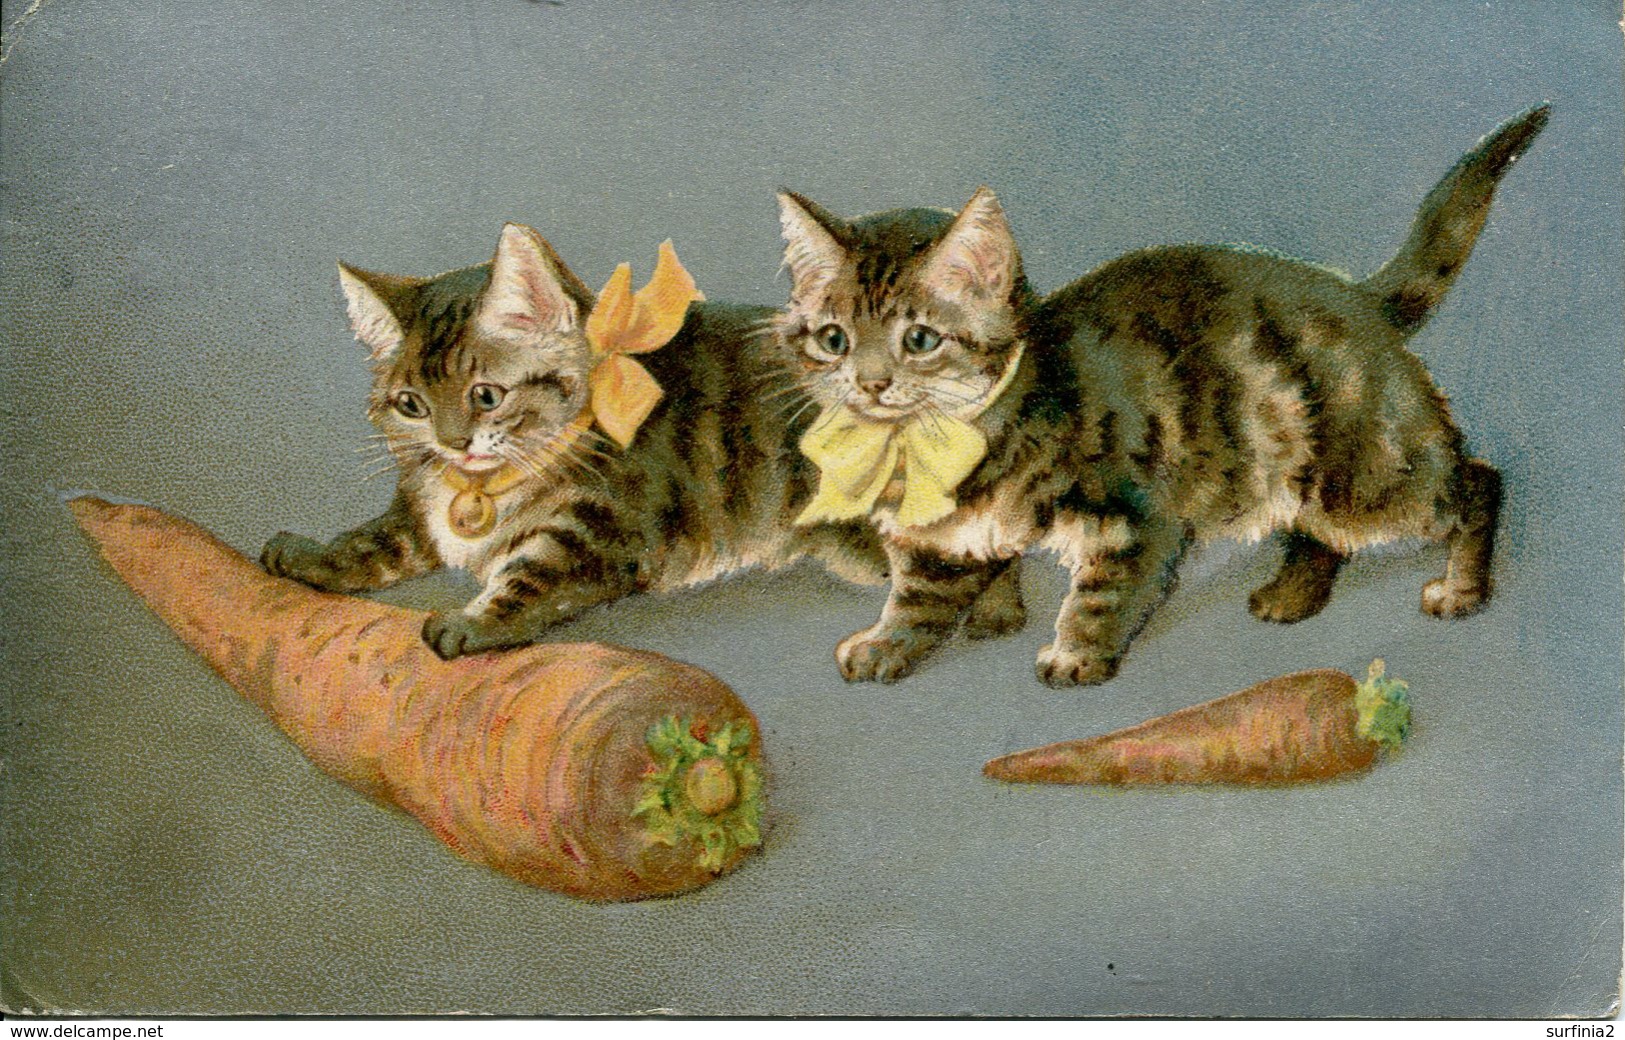 CATS - 2 KITTENS WITH CARROT 1908 C529 - Cats